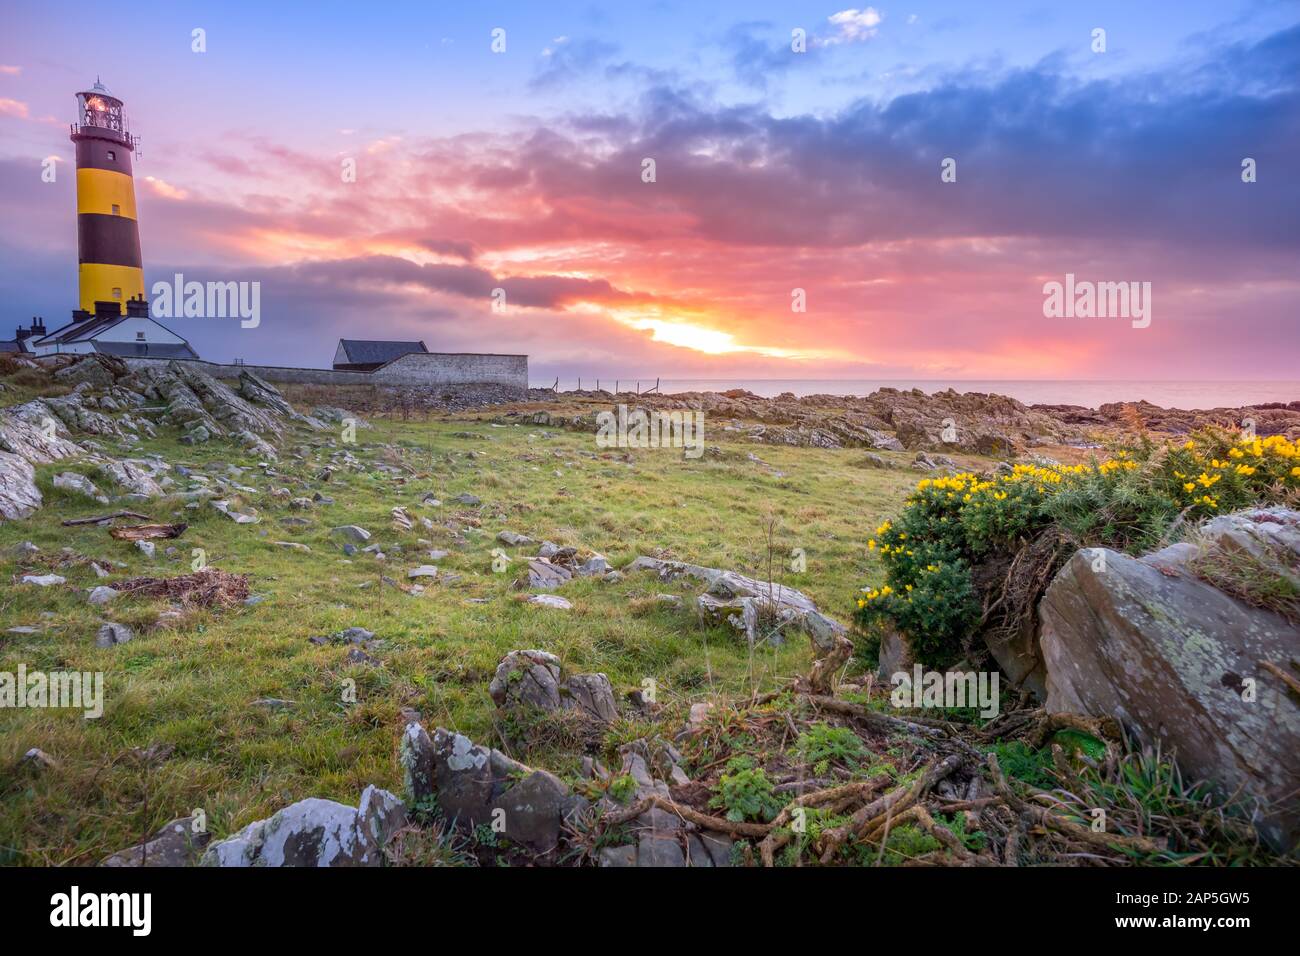 Amazing sunrise at St. Johns Point Lighthouse in County Down, Northern Ireland. Rocks and flowers on coastline. Stock Photo